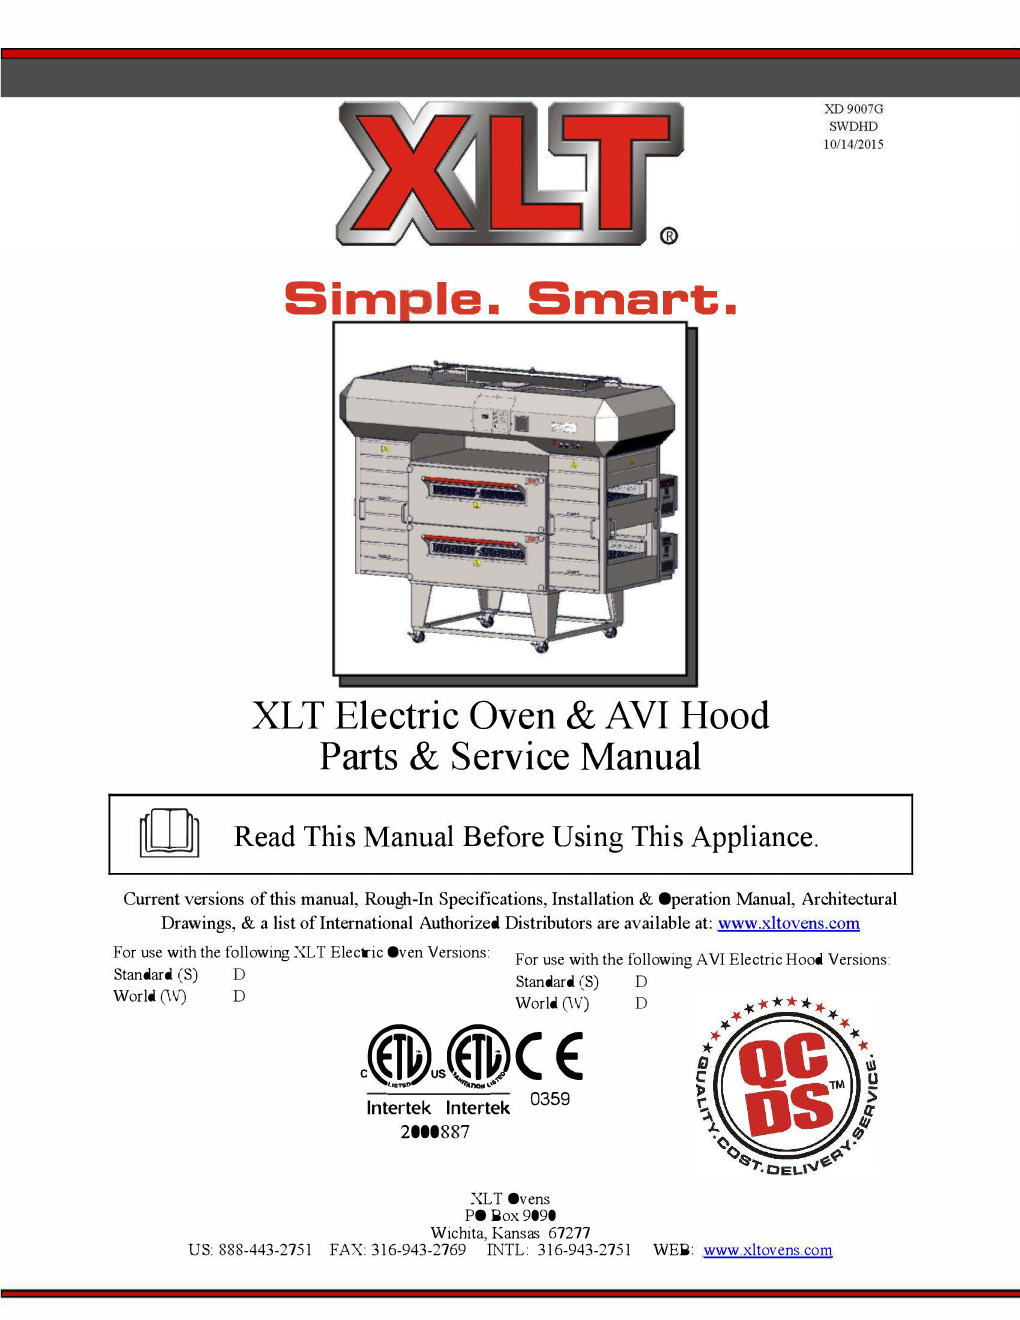 W Read This Manual Before Using This Appliance